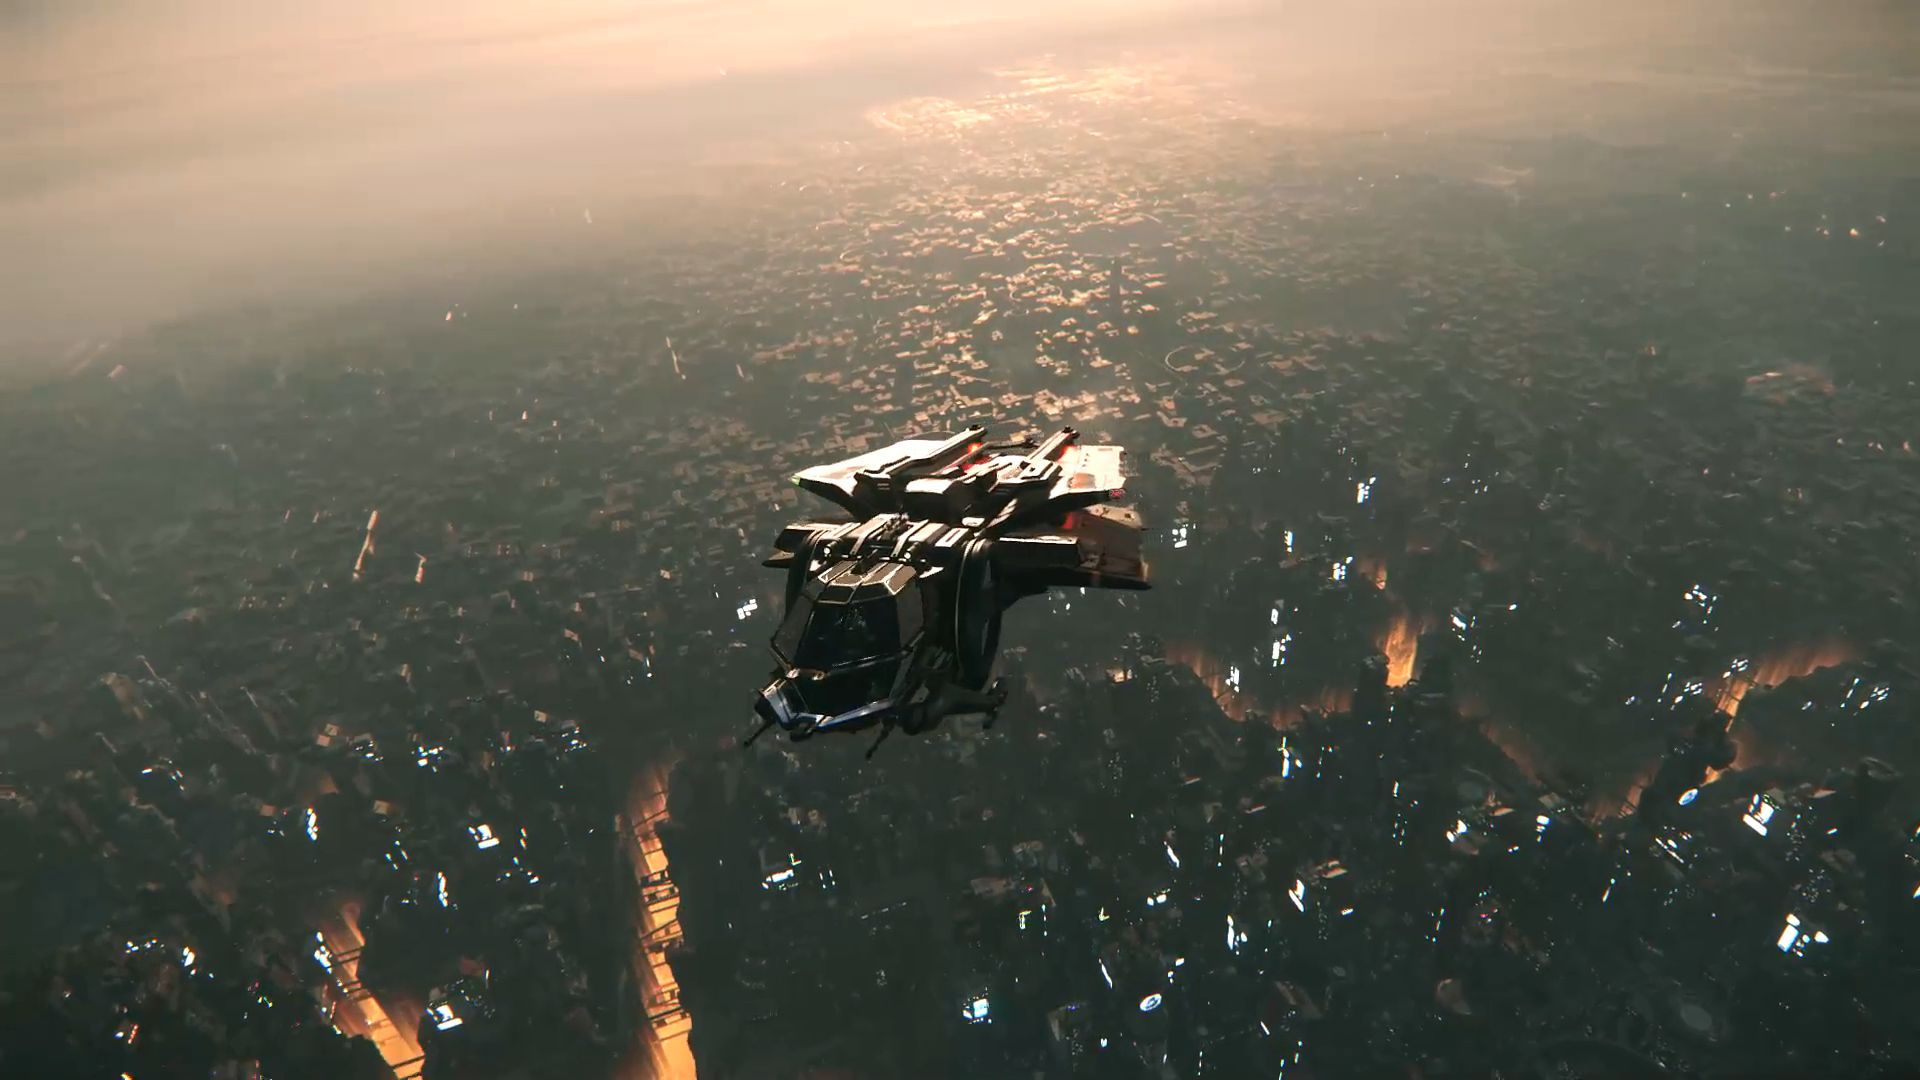 Star Citizen Gameplay Video Shows Crazy Planetary Tech and Visuals